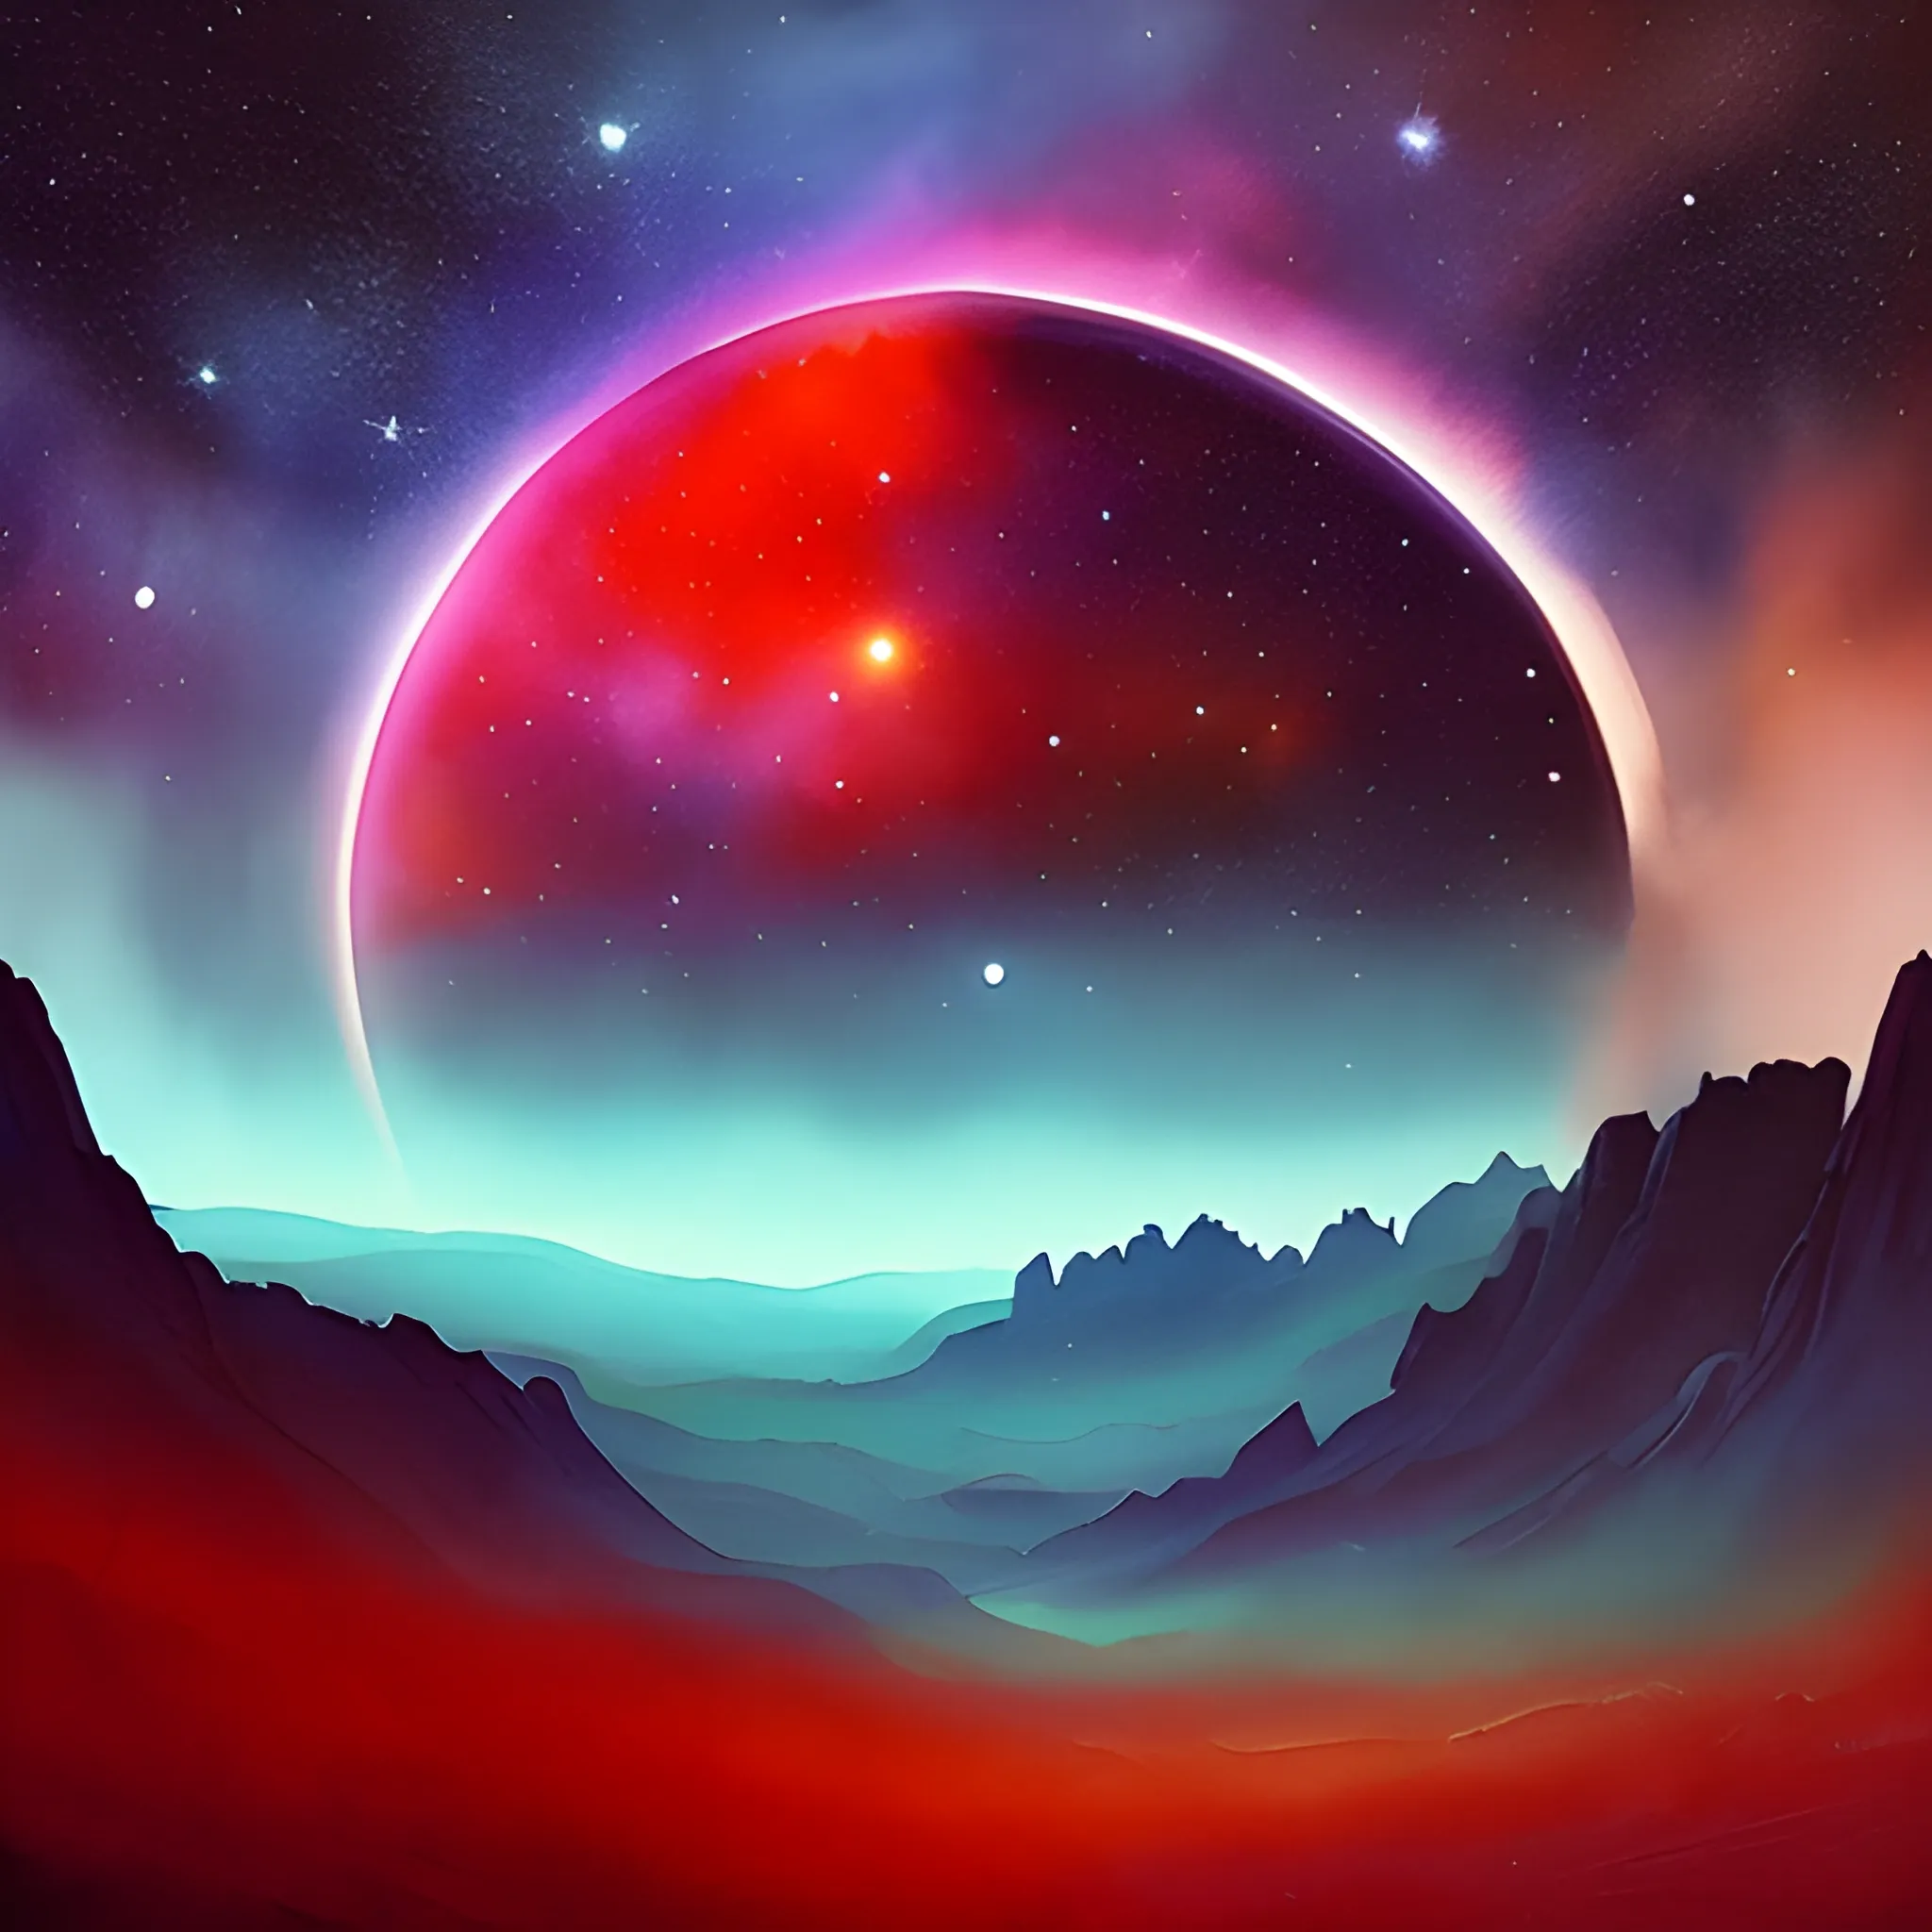 Create a space landscape in the style of the movie '2001: A Space Odyssey' using a watercolor technique. The landscape should be dominated by shades of red, with details of stars, planets, and nebulas. The scene should evoke the sense of awe and mystery of deep space. Ensure the image is detailed and rich in textures, as if it were hand-painted.